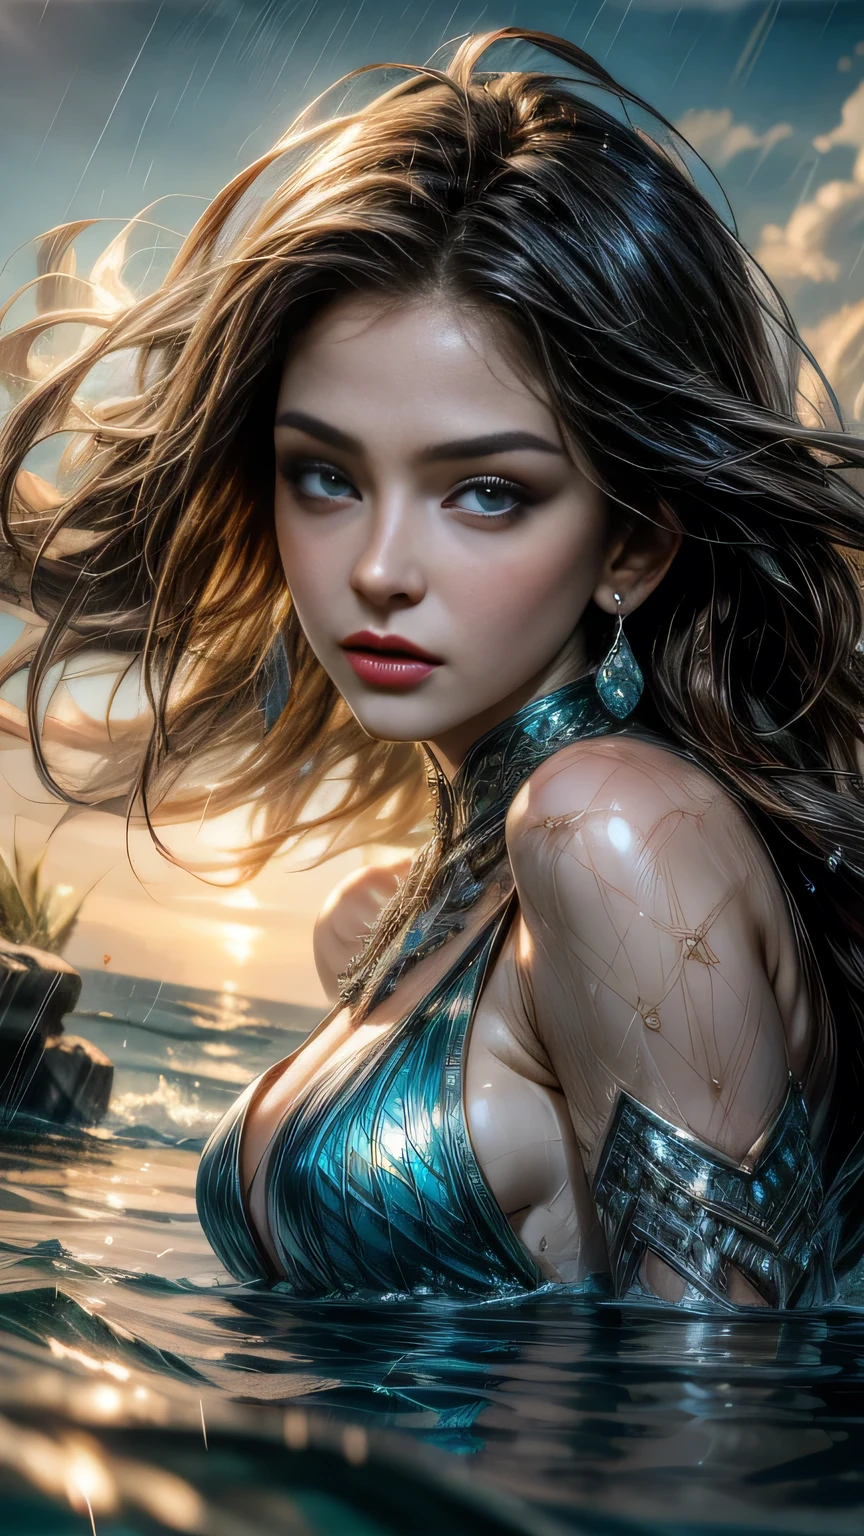 (RAW shooting, dignity: 1.0, 32k: 1.5, highest quality, masterpiece, super high resolution), (Snow, sea: 0.7, majestic background: 0.7, mysterious expression: 1.3,), Perfect dynamic composition: 1.3, Mermaid princess swimming in the sea, alone, highly detailed skin and facial texture: 1.3, (Slim mermaid: 1.3, mermaid tail), dynamic pose, random angle, fair skin: 1.2, Believable Incredibly beautiful body: 1.2, Fractal art: 1.1, Very beautiful face: 1.1, Detailed and perfect face: 1.2, Water drops skin, details, (Rain dripping on the body: 1.1, Wet body: 1.1, Wet hair :1.1), (Posing pro: 0.9, Holding a wet bouquet: 0.9, Portrait in a gorgeous, shiny mermaid dress: 1.1, Woven belt ), Well-shaped chest, (Big eyes that exude beautiful eroticism: 0.5 , Lips that exude beautiful eros: 0.5), I love you, Very sweet atmosphere, Necklace, earrings, bracelet,